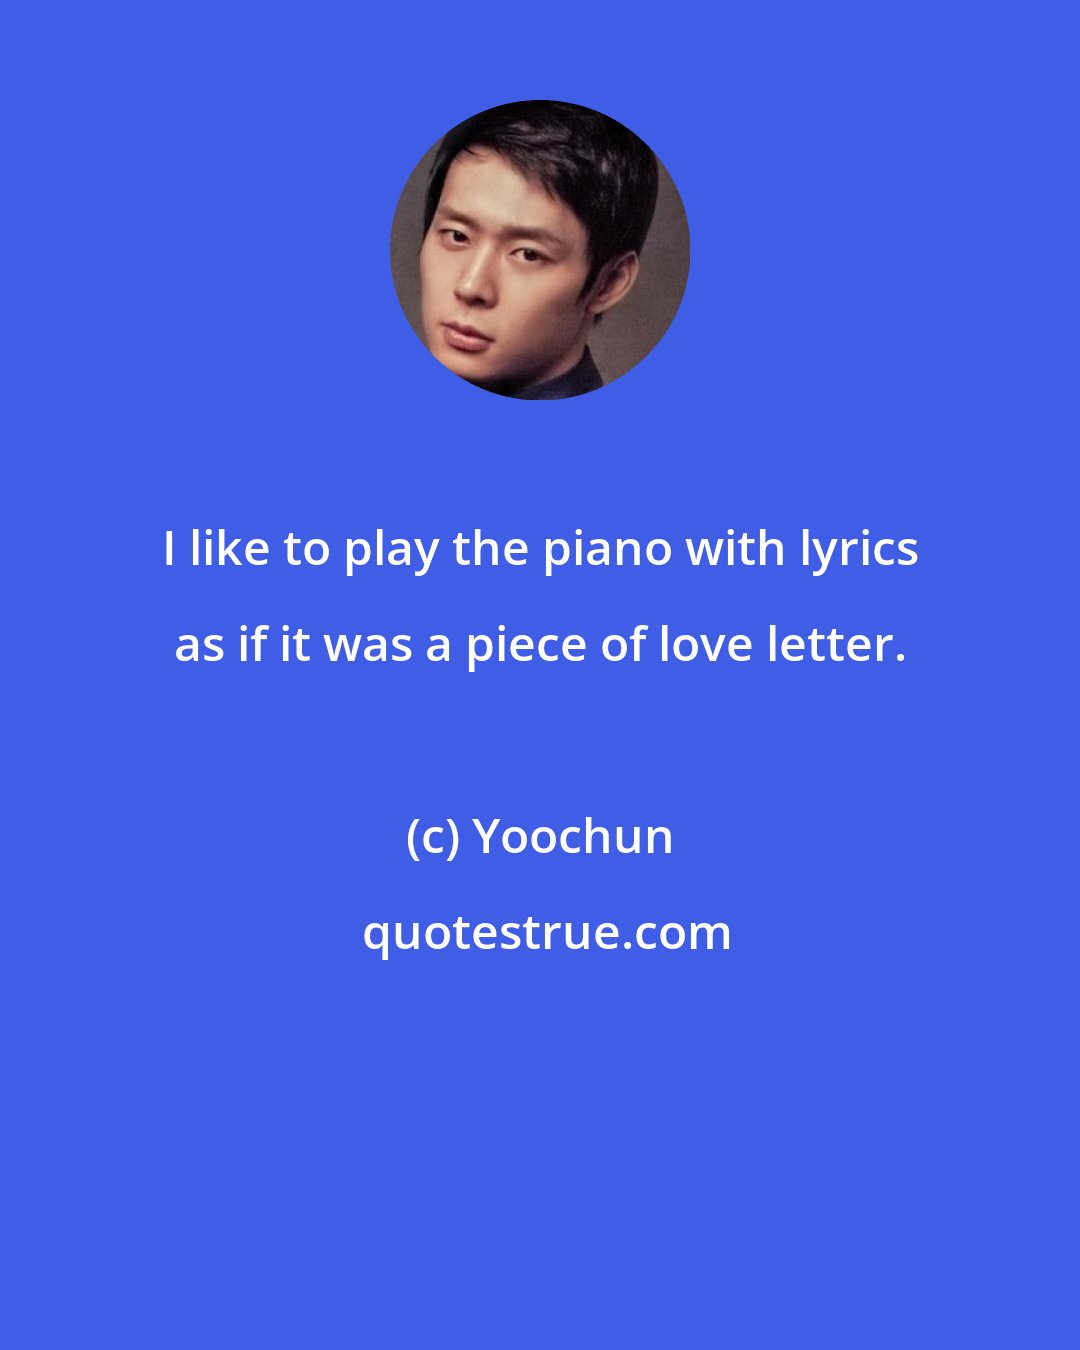 Yoochun: I like to play the piano with lyrics as if it was a piece of love letter.